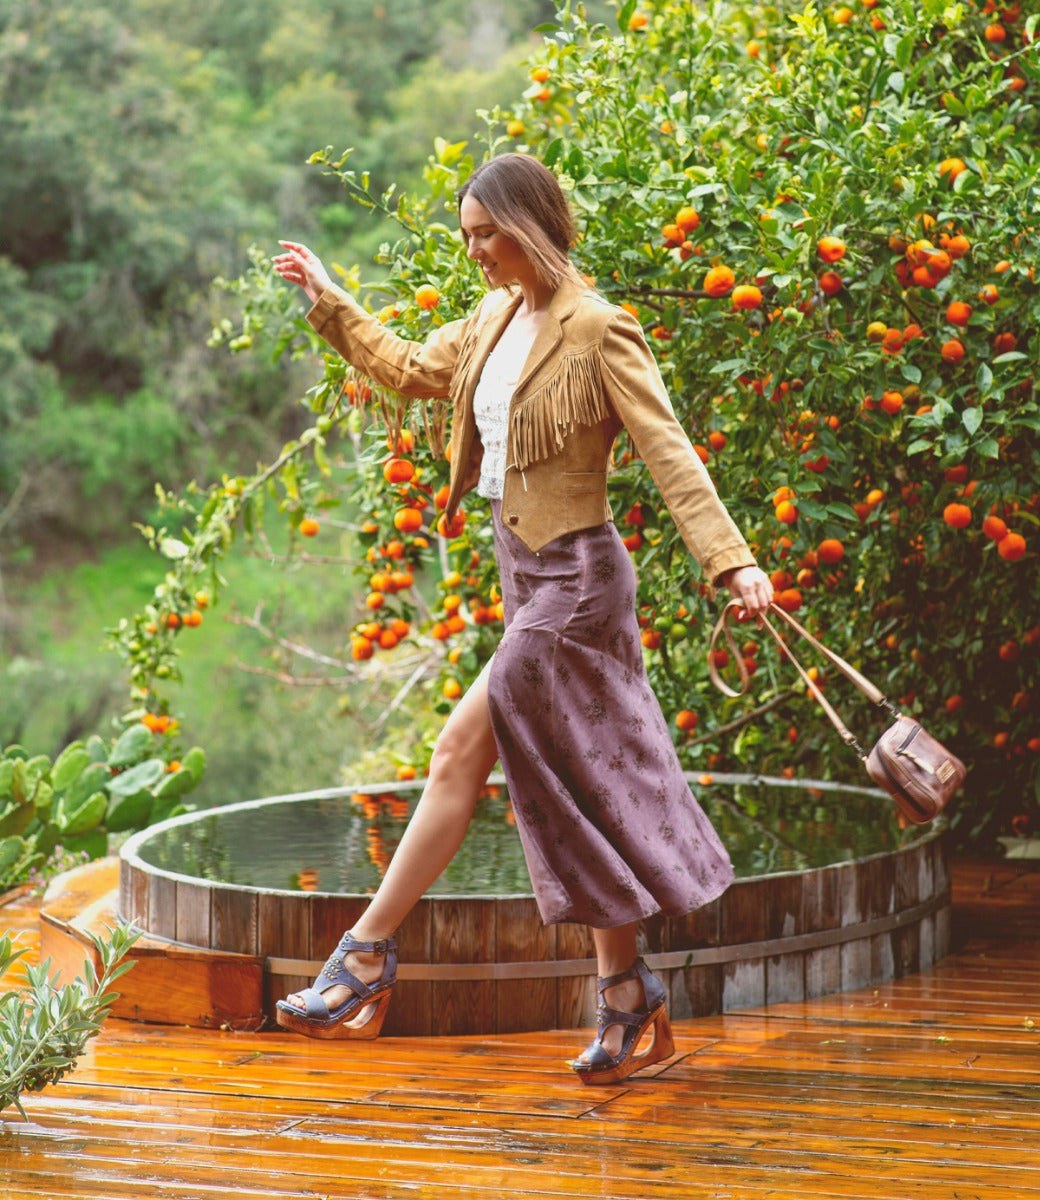 A woman walking on a Millennial deck with an orange tree in the background. Brand name: Bed Stu.